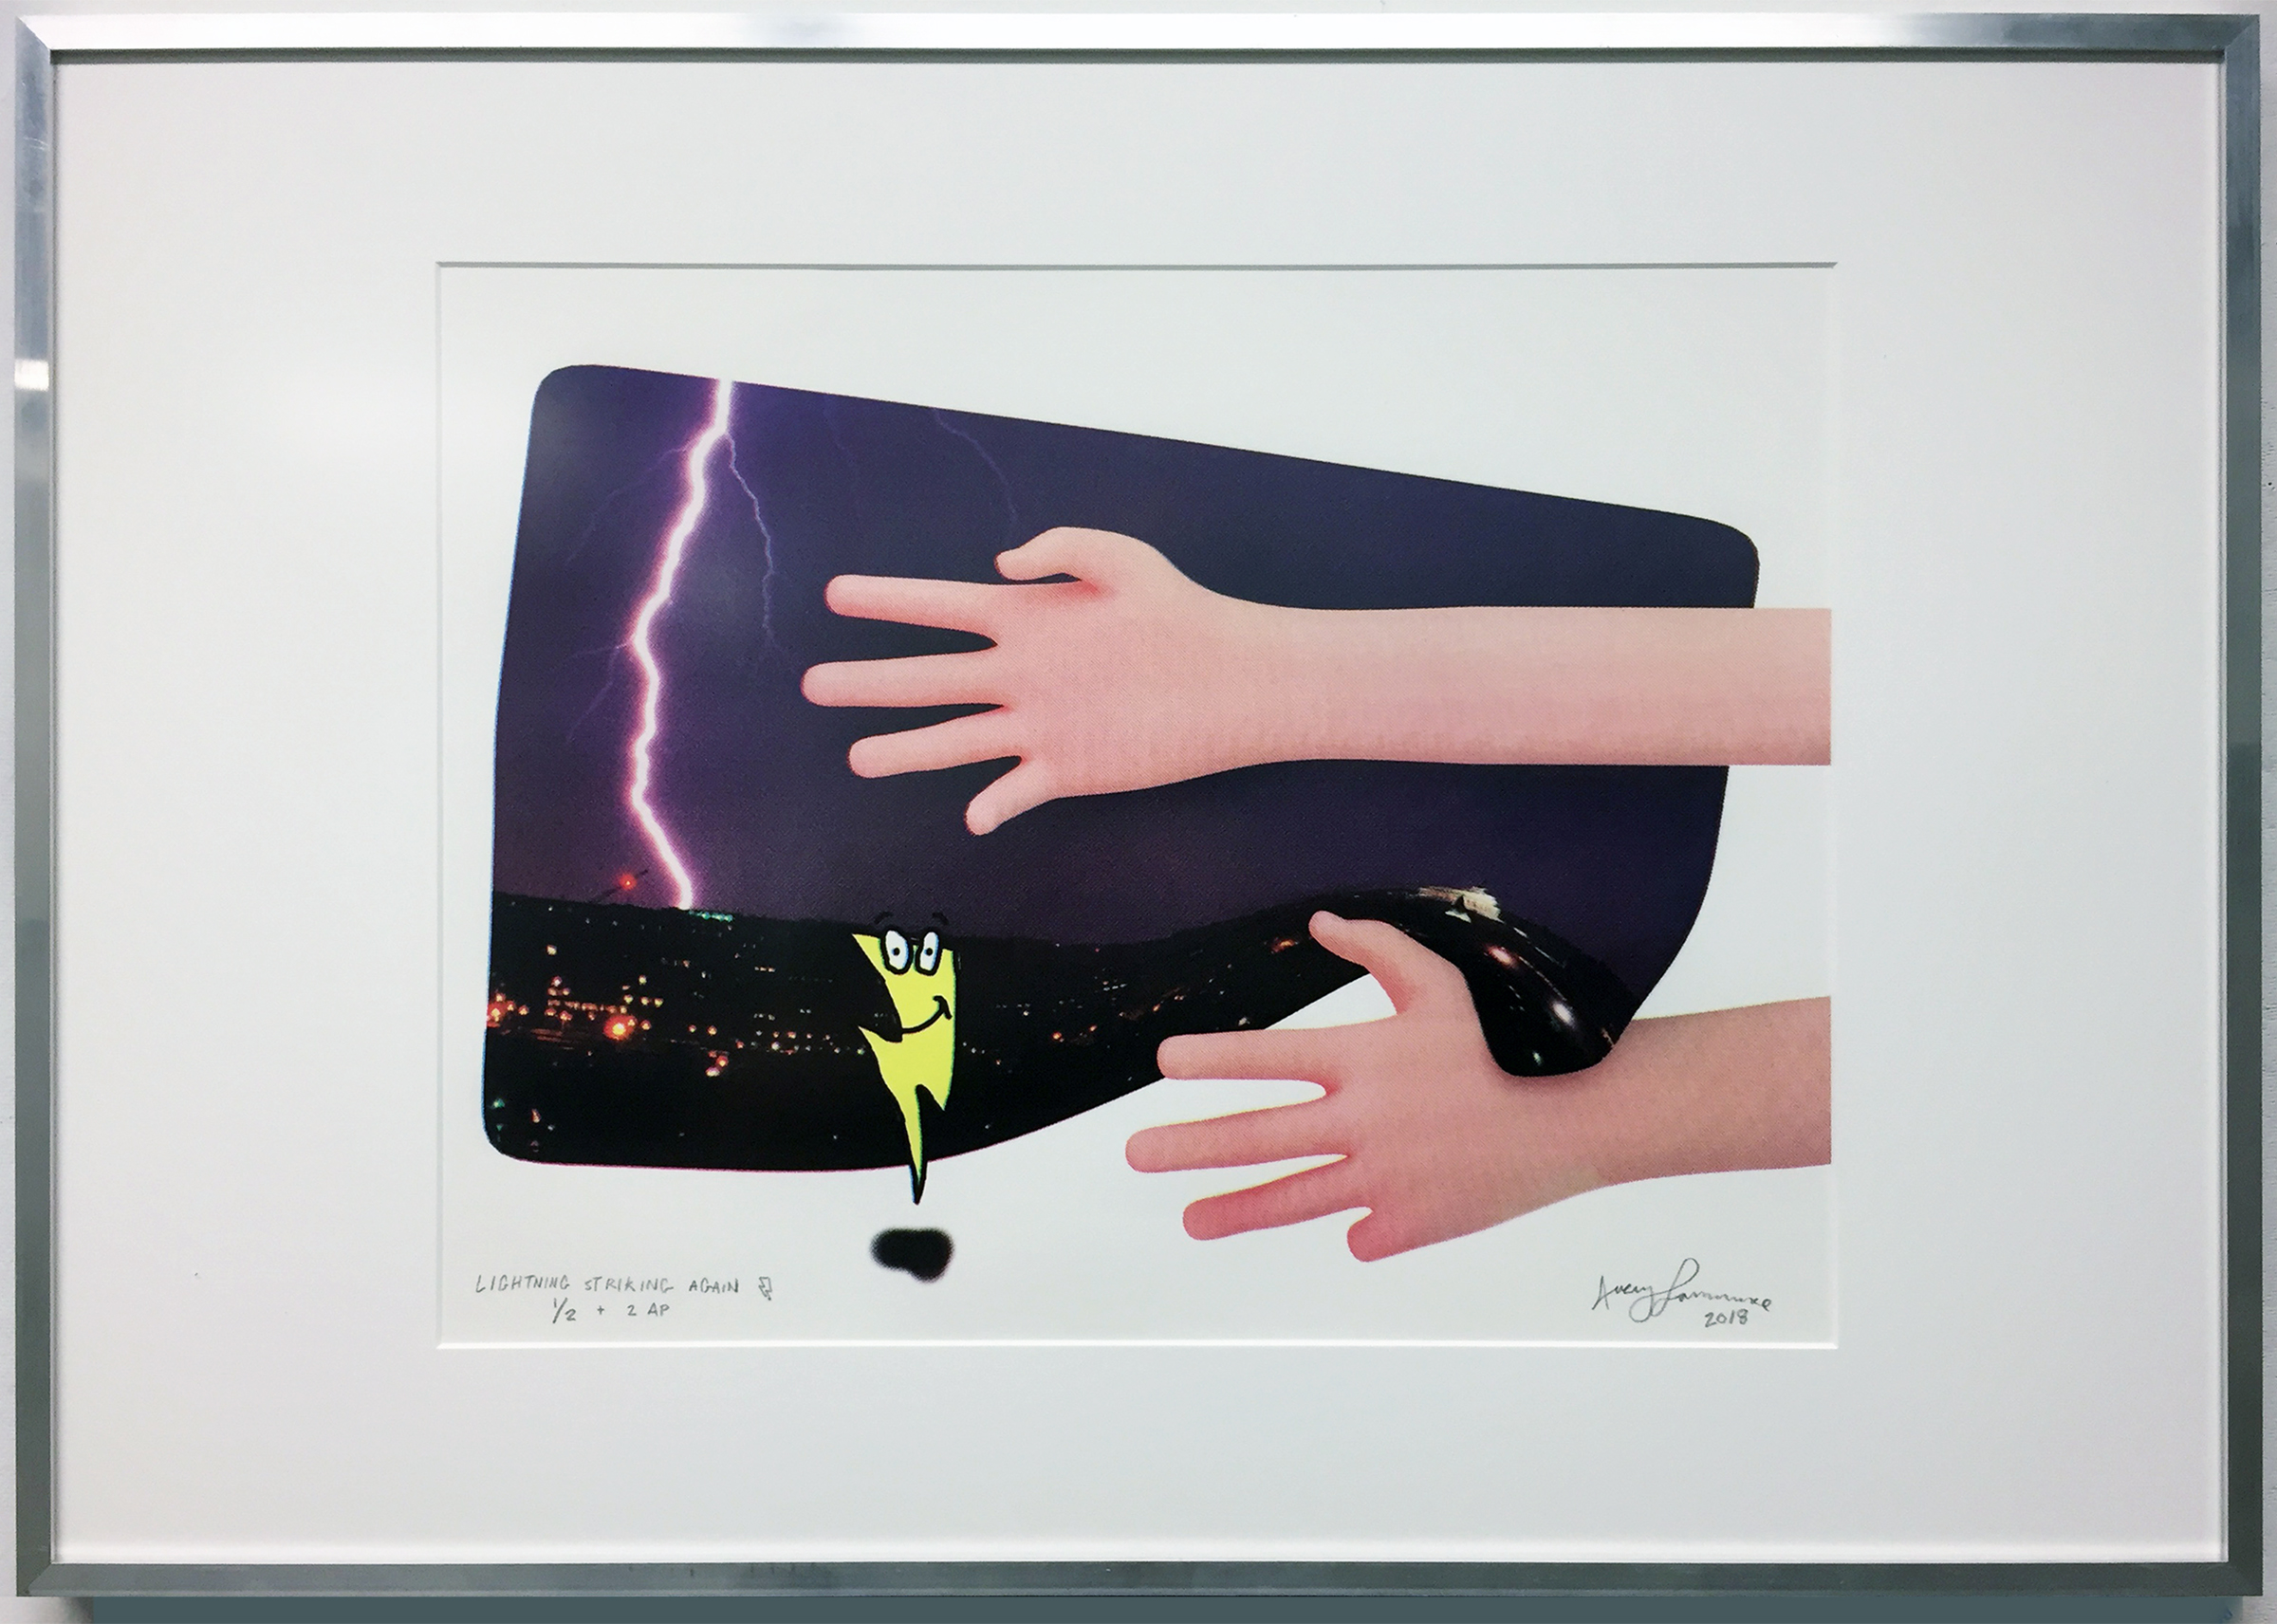 A photograph of a screen-printed image of two pink arms interacting with a piece of fabric and a cartoon lightning bolt.